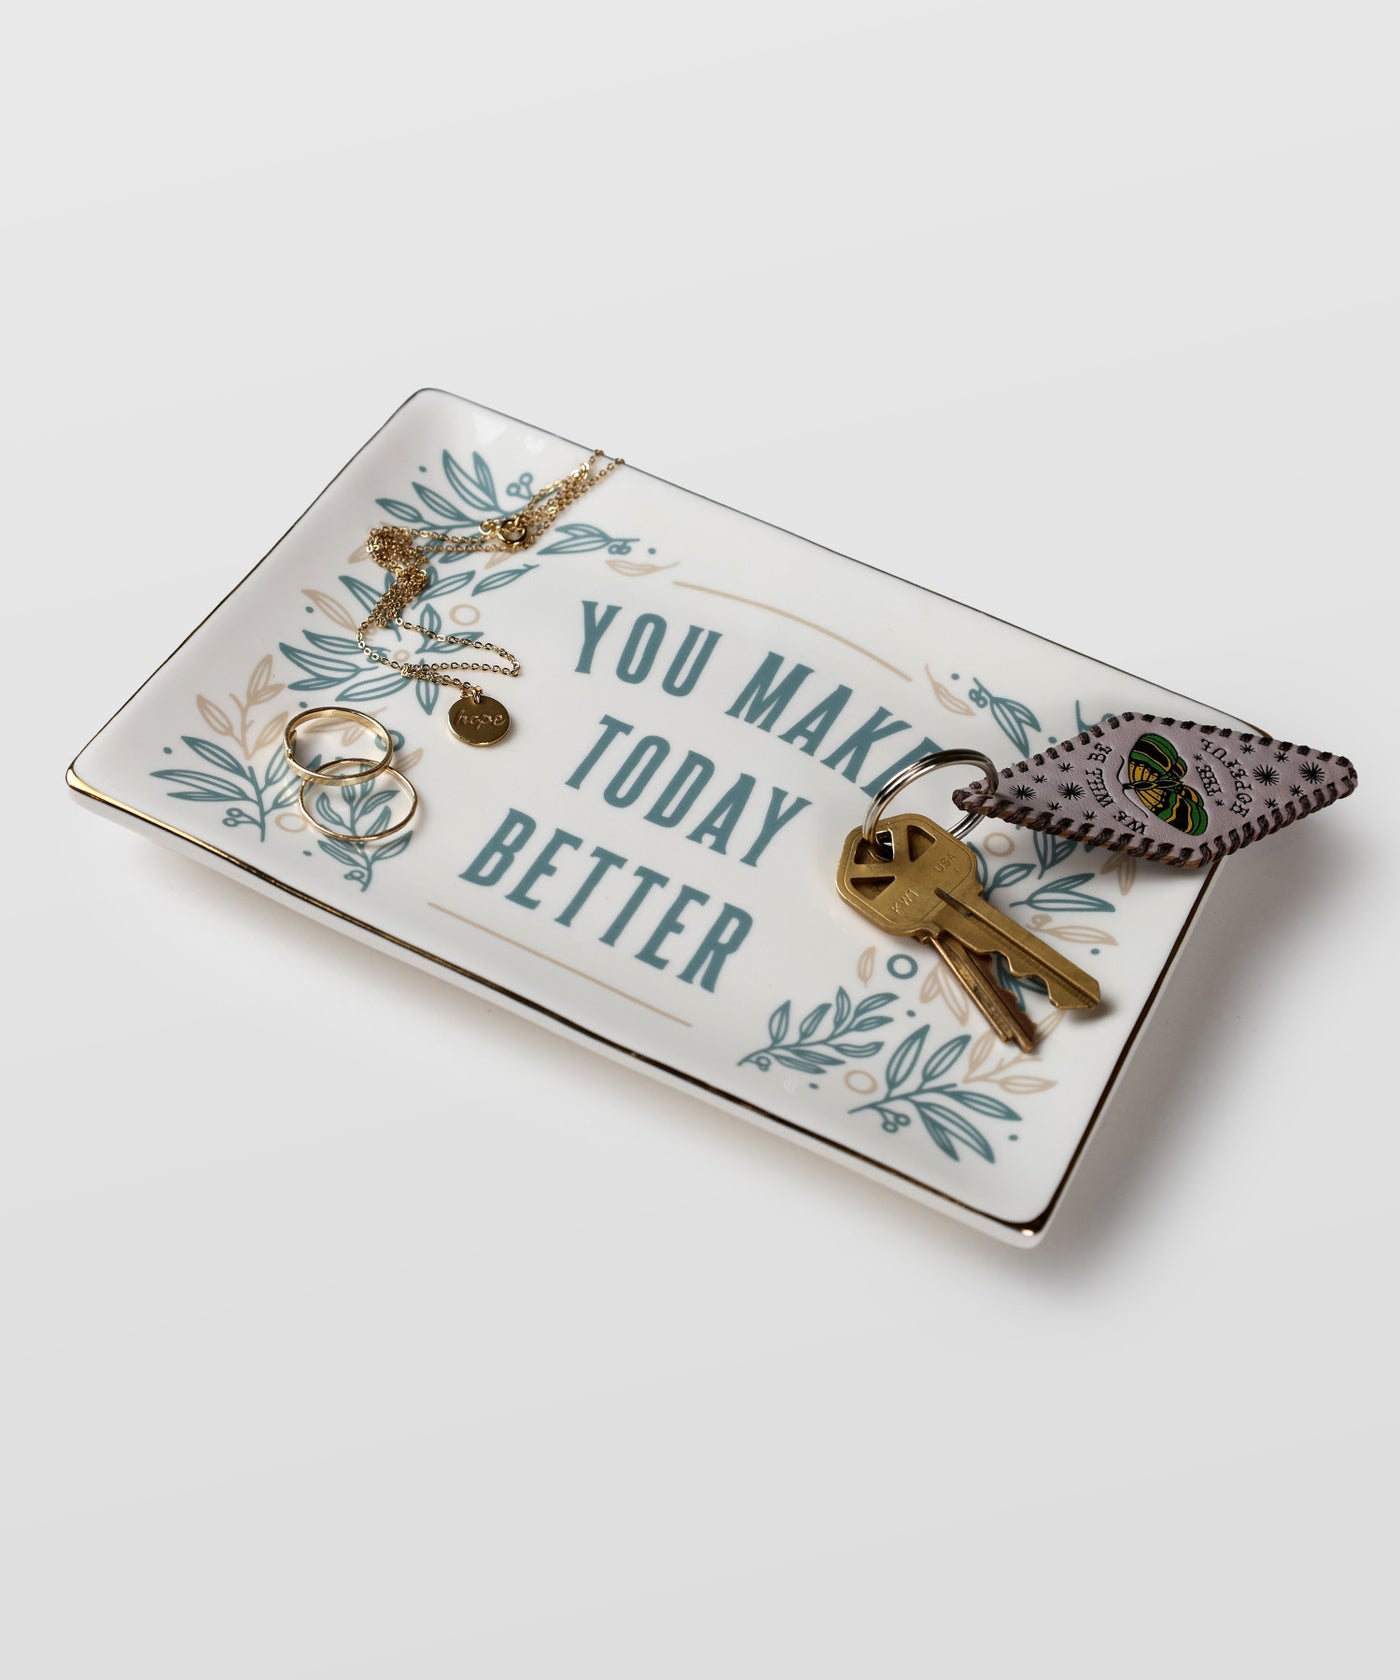 You Make Today Better Catchall Tray